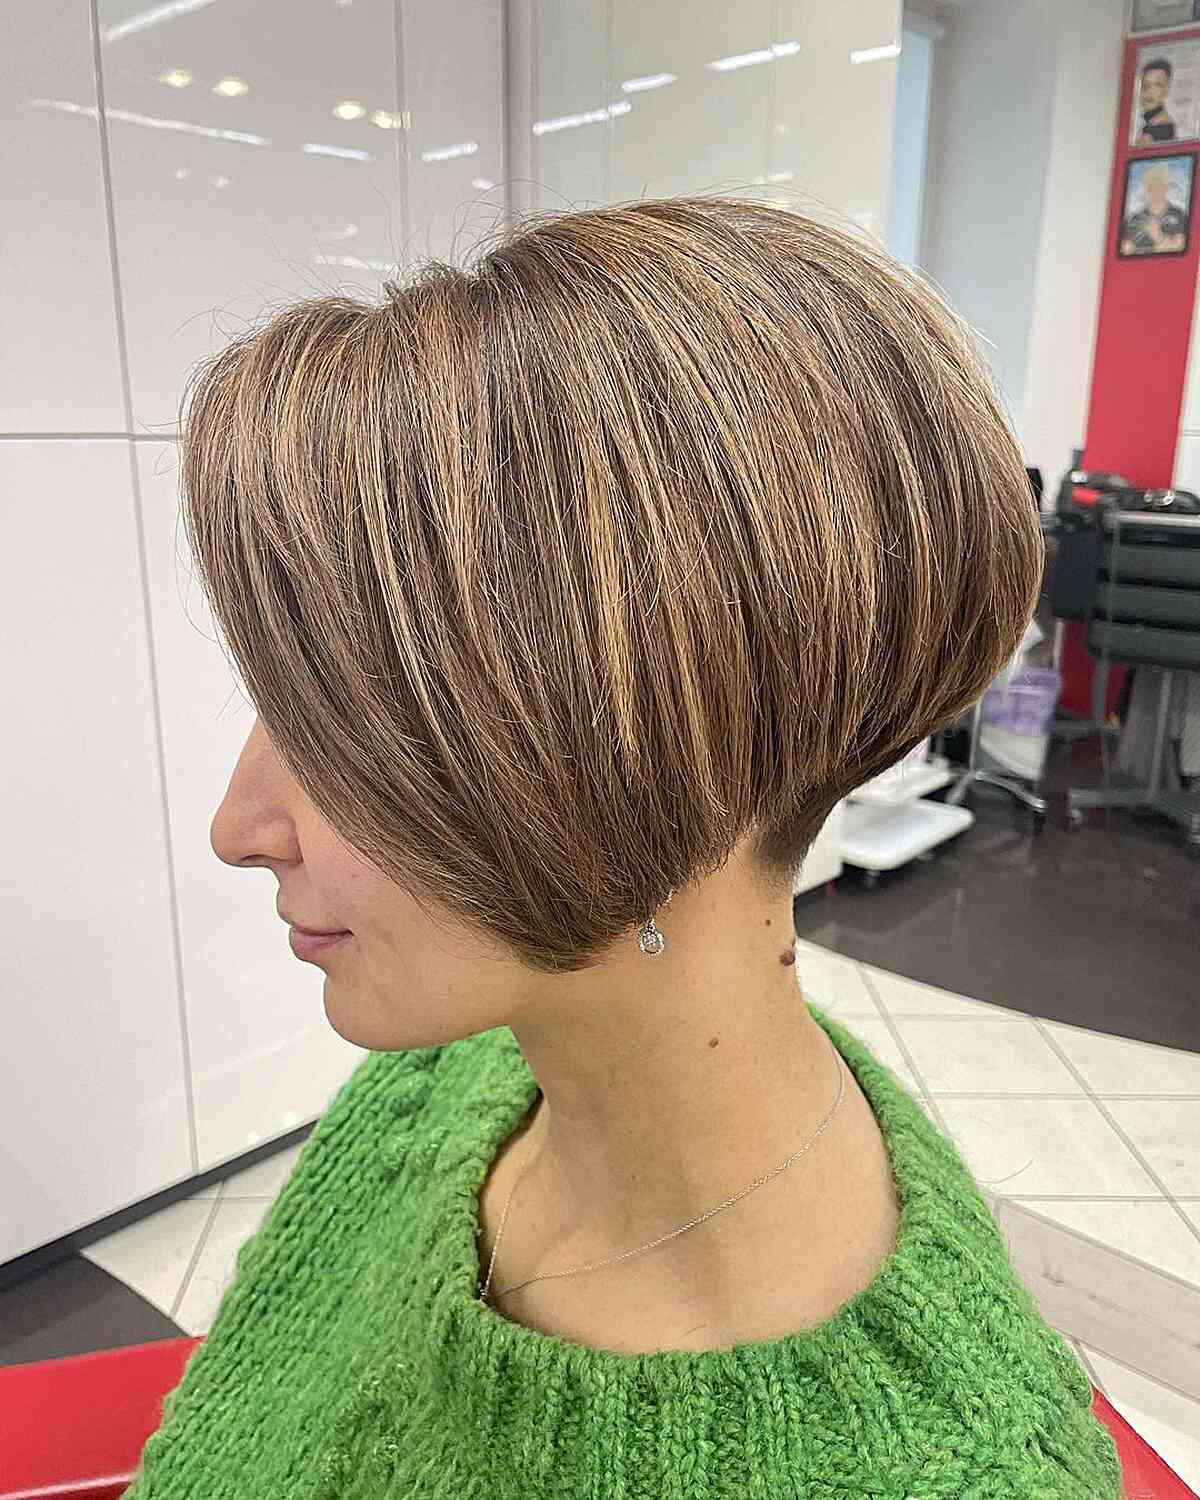 Short Wedge Cut with a Nape Undercut for Thick Hair